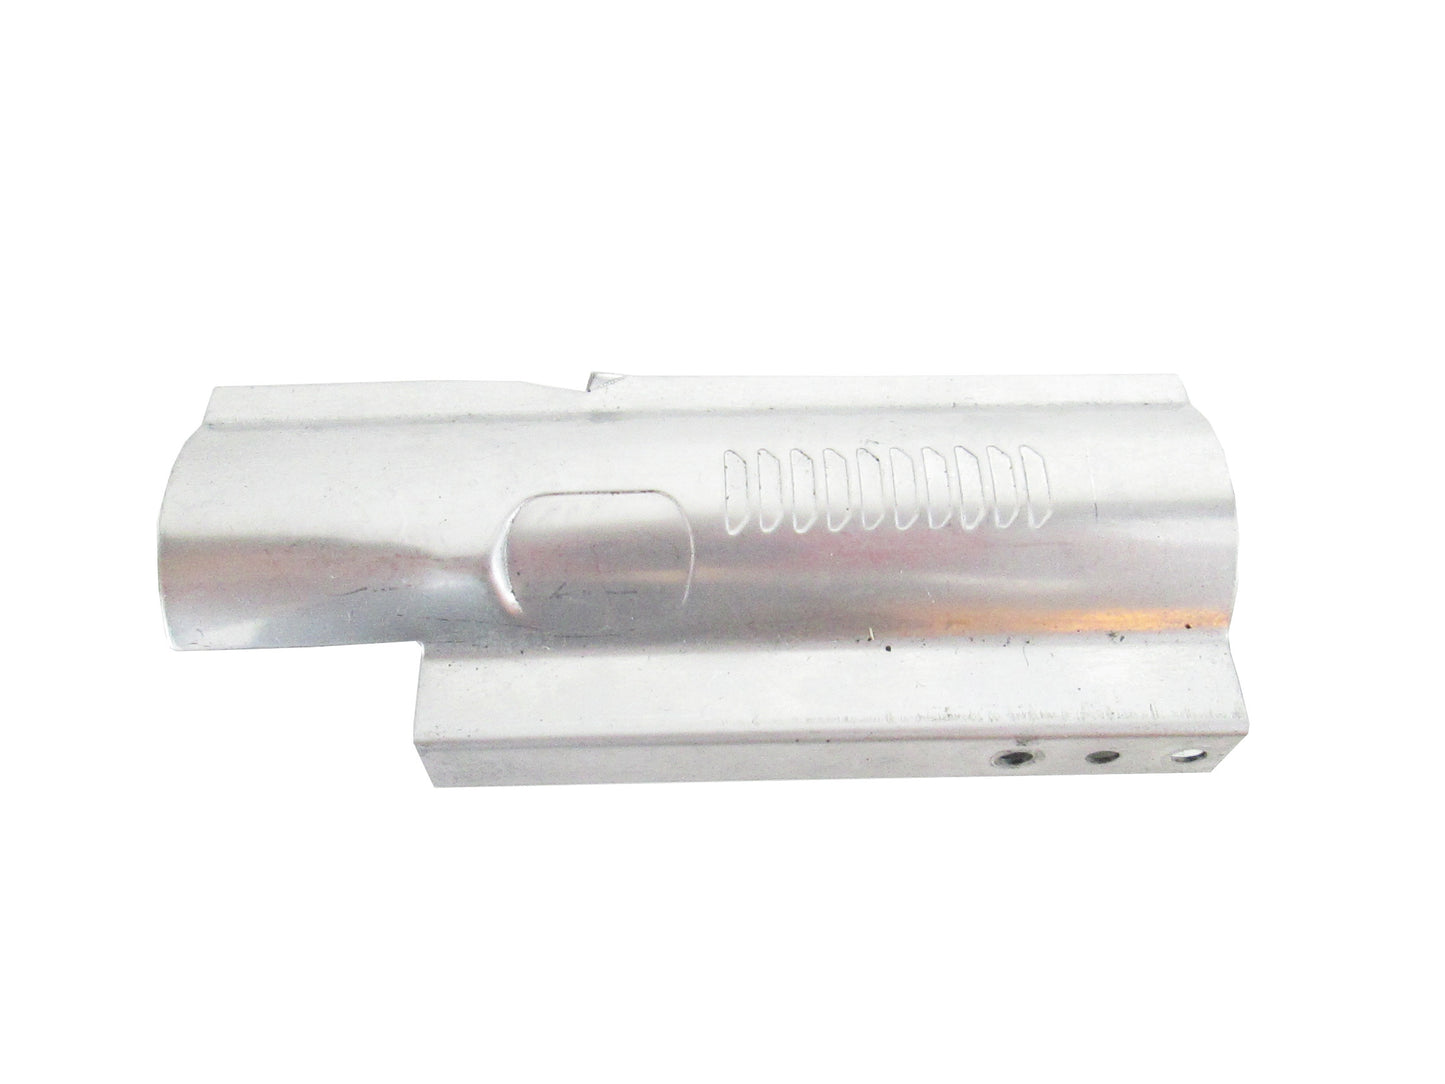 Full Metal M4  M16 Silver Ejection Port Mock Bolt Cover